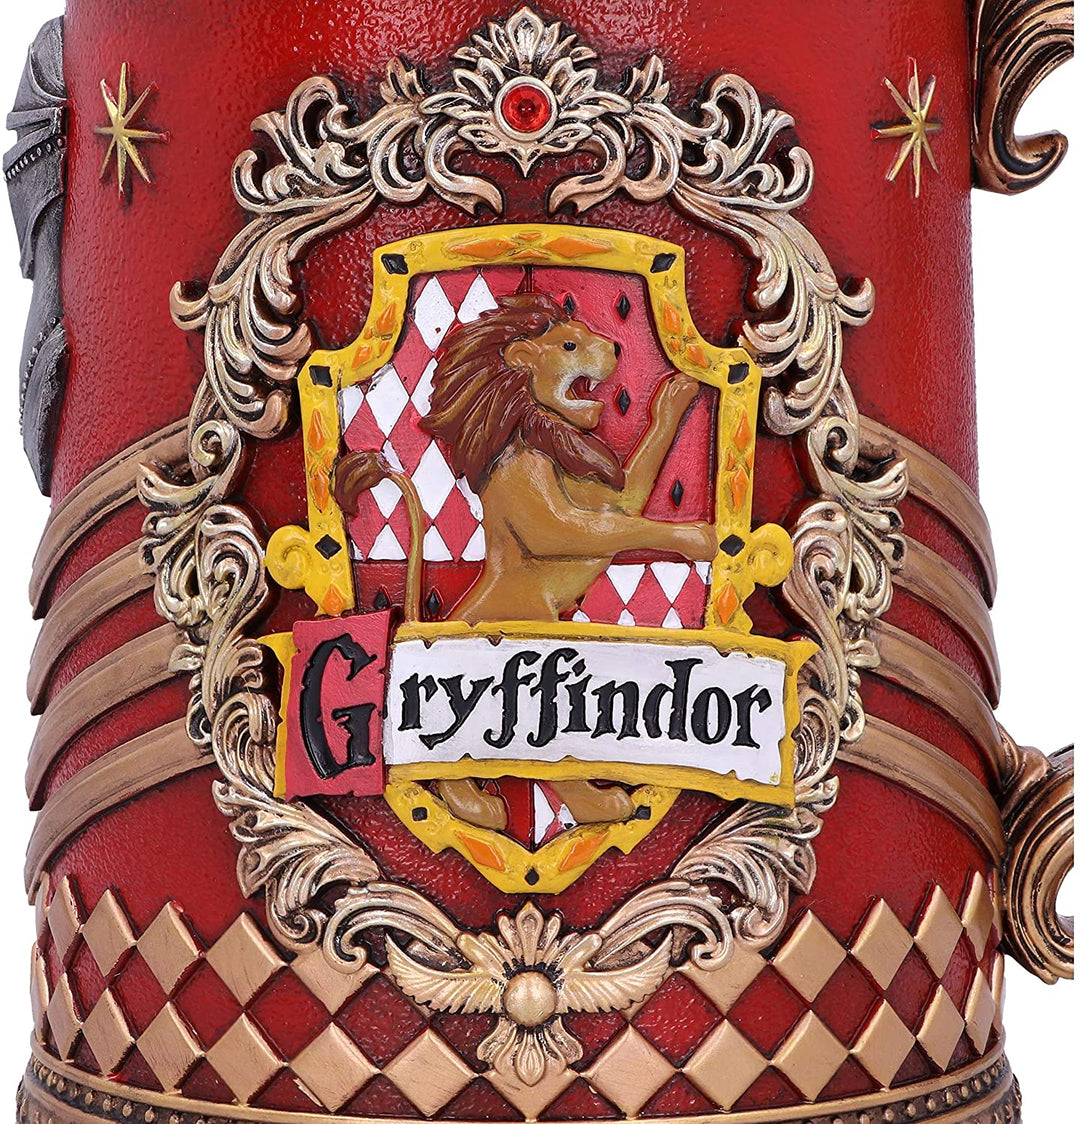 Harry Potter Gryffindor Hogwarts House Collectible Tankard, Red Gold, 1 Count (Pack of 1)